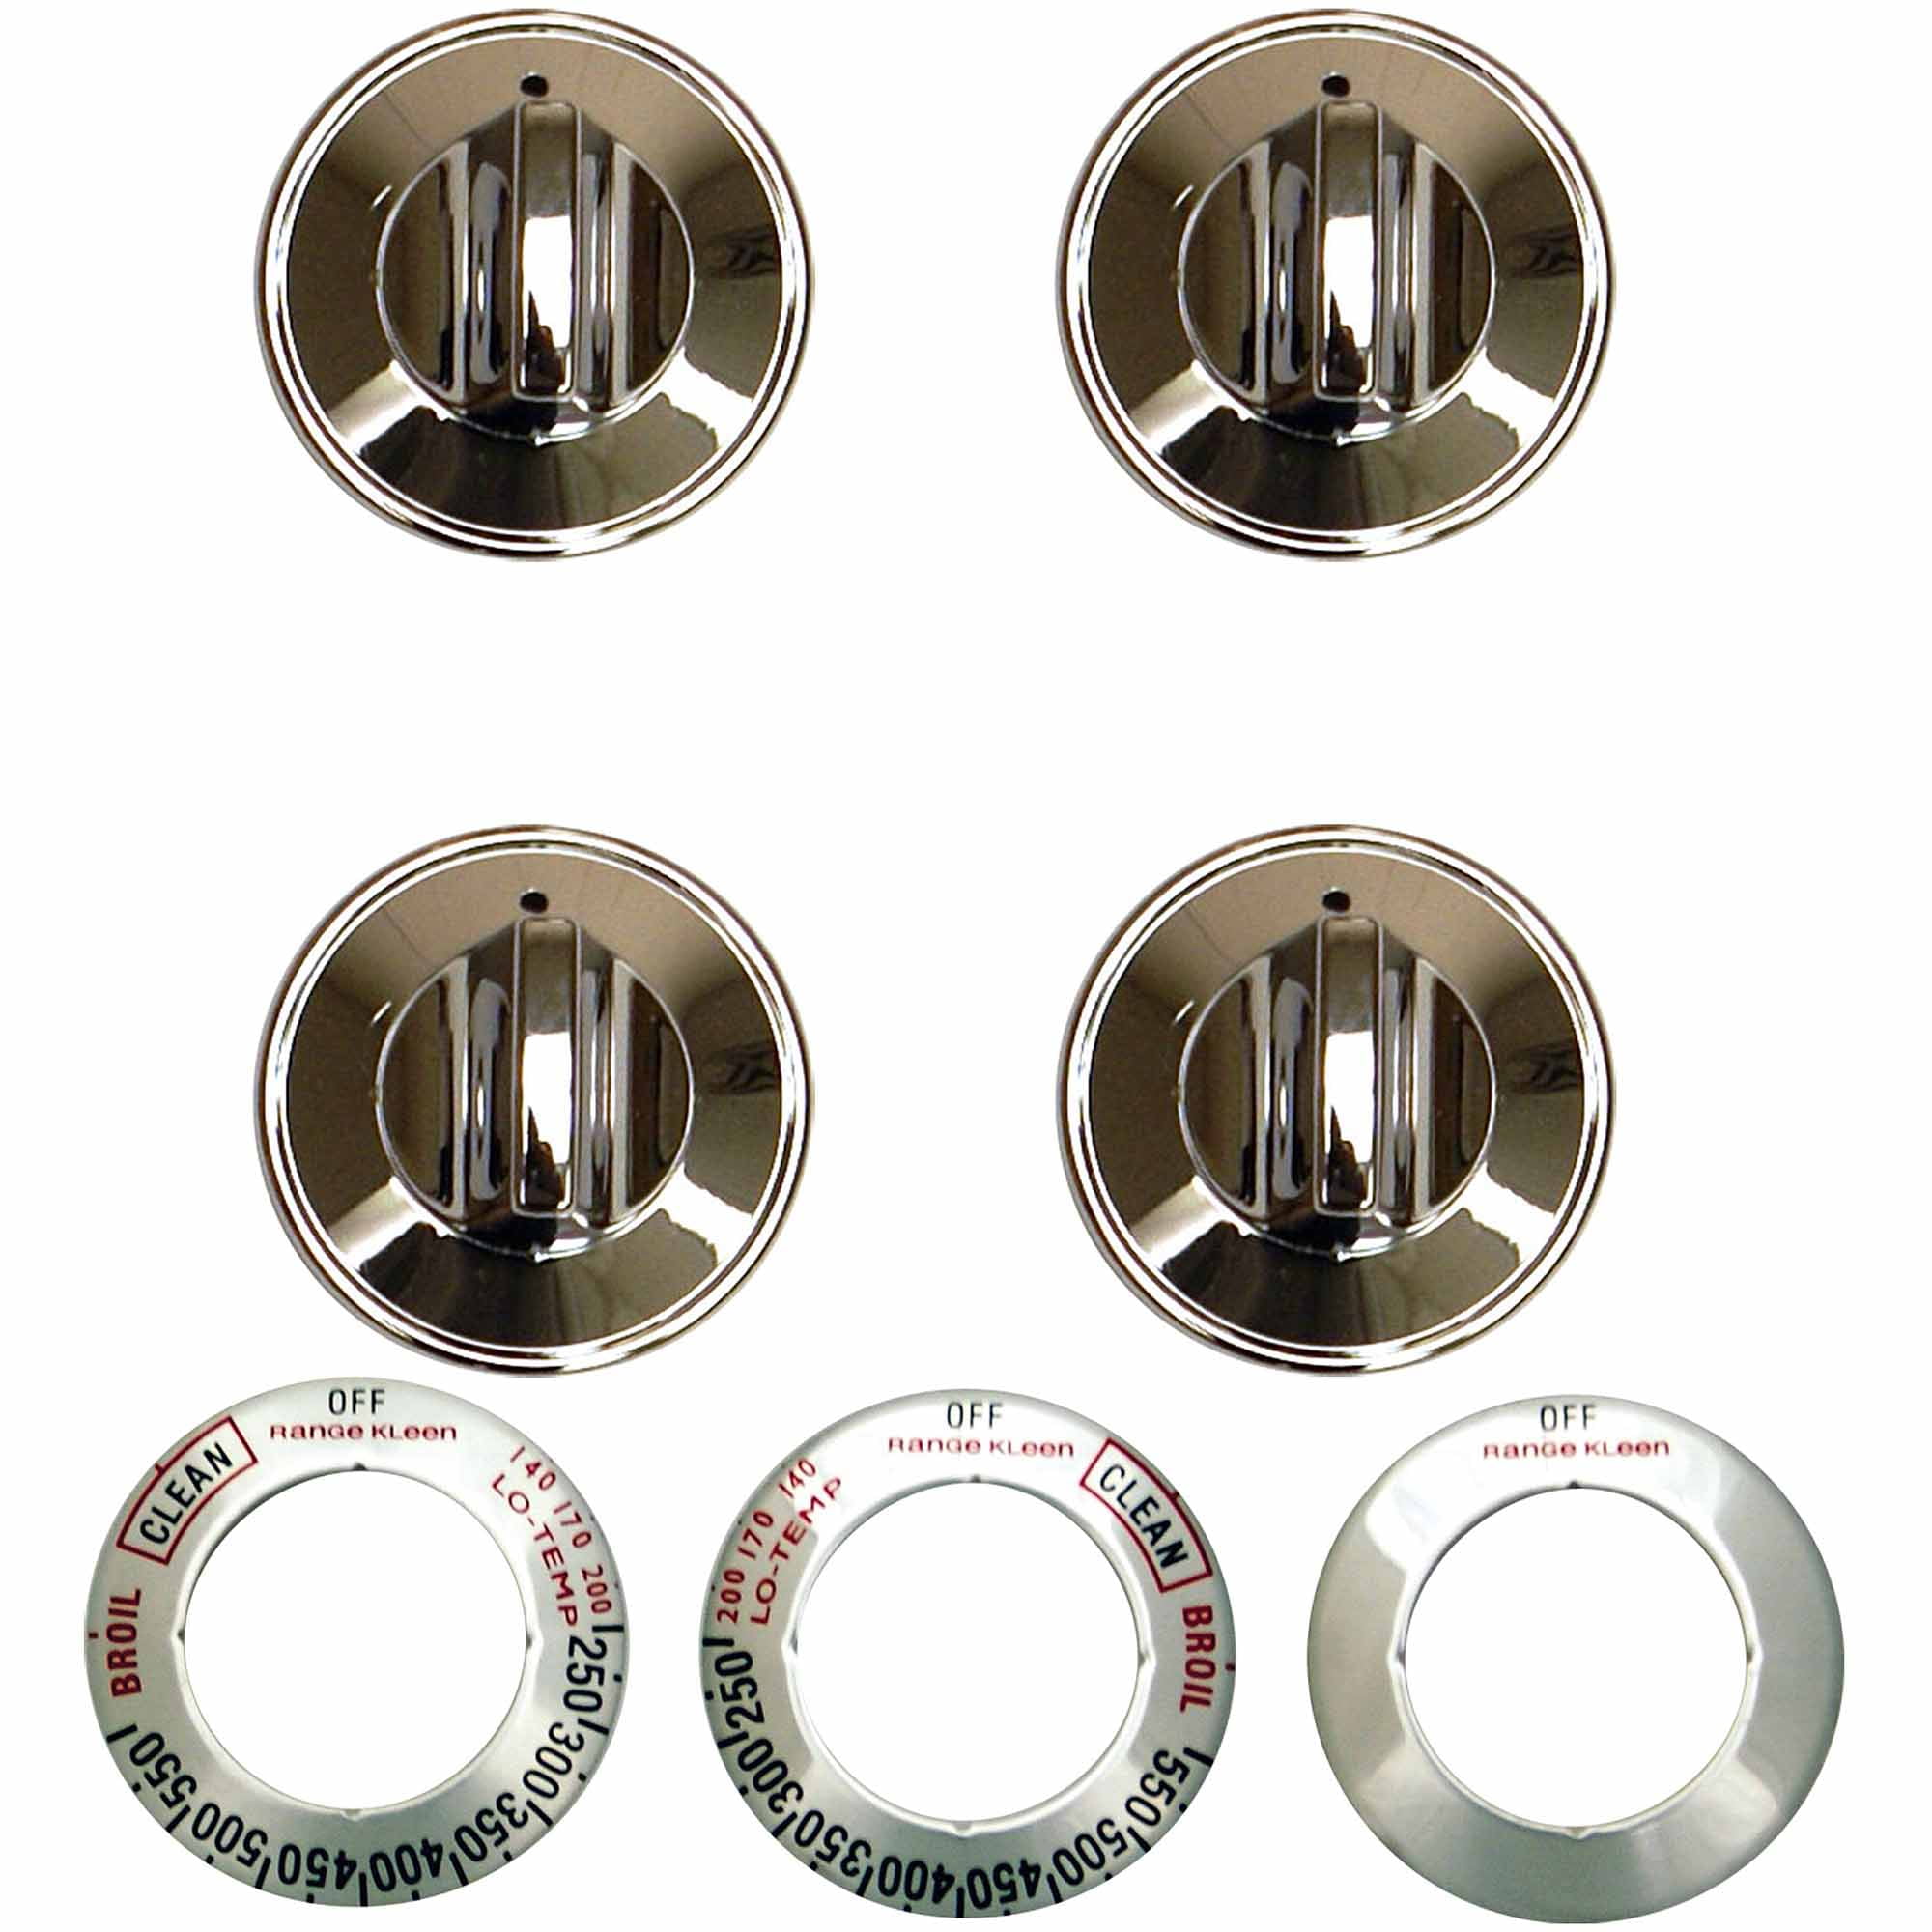 Gas Grill Universal Knob Replacement Control Knobs Chrome Plated FREE SHIPPING 